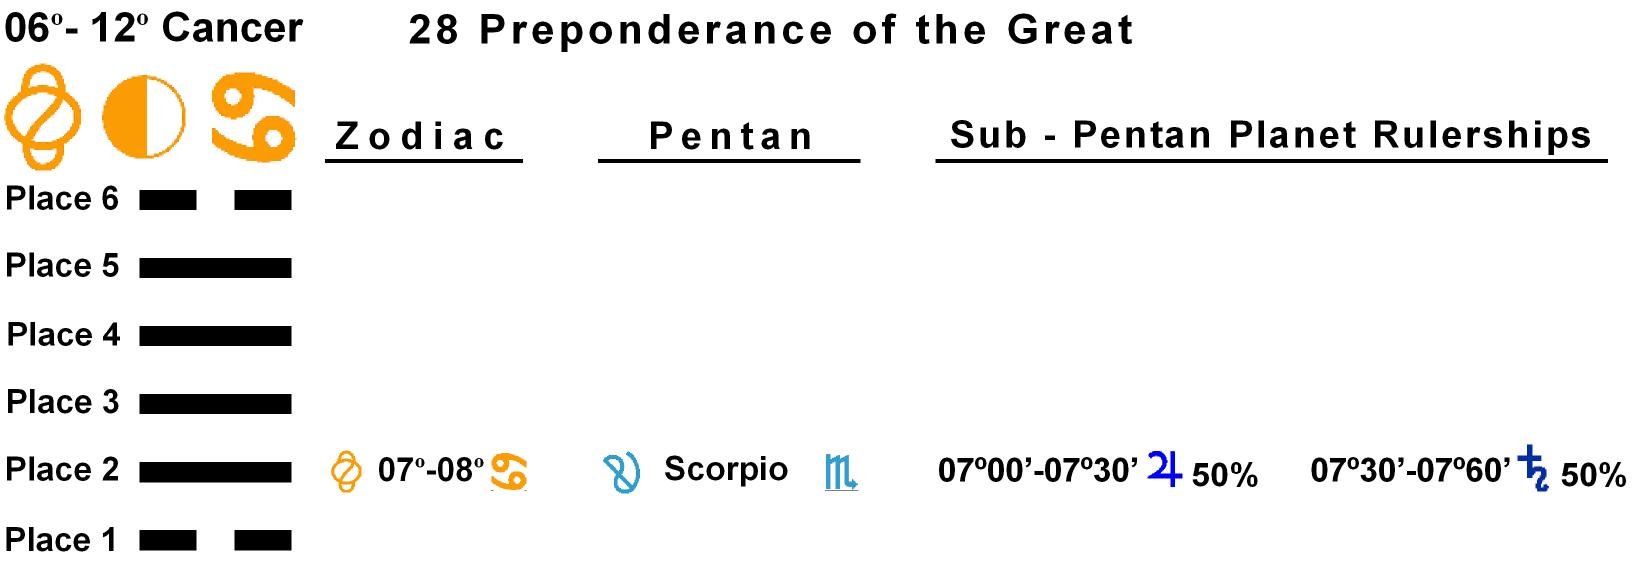 Pent-lines-04CA 07-08 Hx-28 Preponderance Of The Great